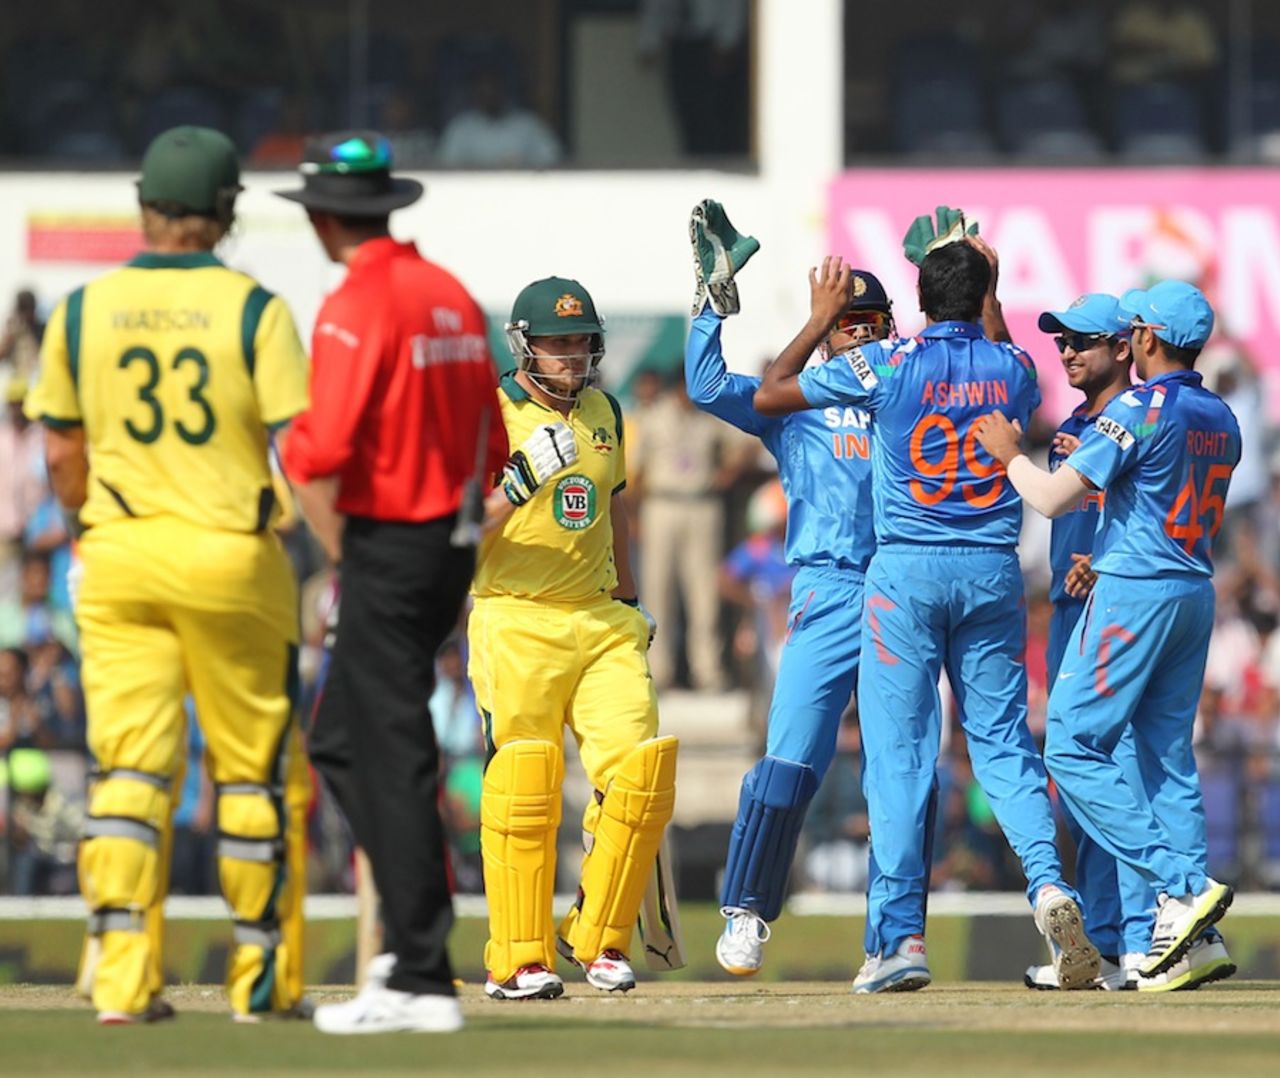 Aaron Finch was dismissed on R Ashwin's first ball, India v Australia, 6th ODI, Nagpur, October 30, 2013